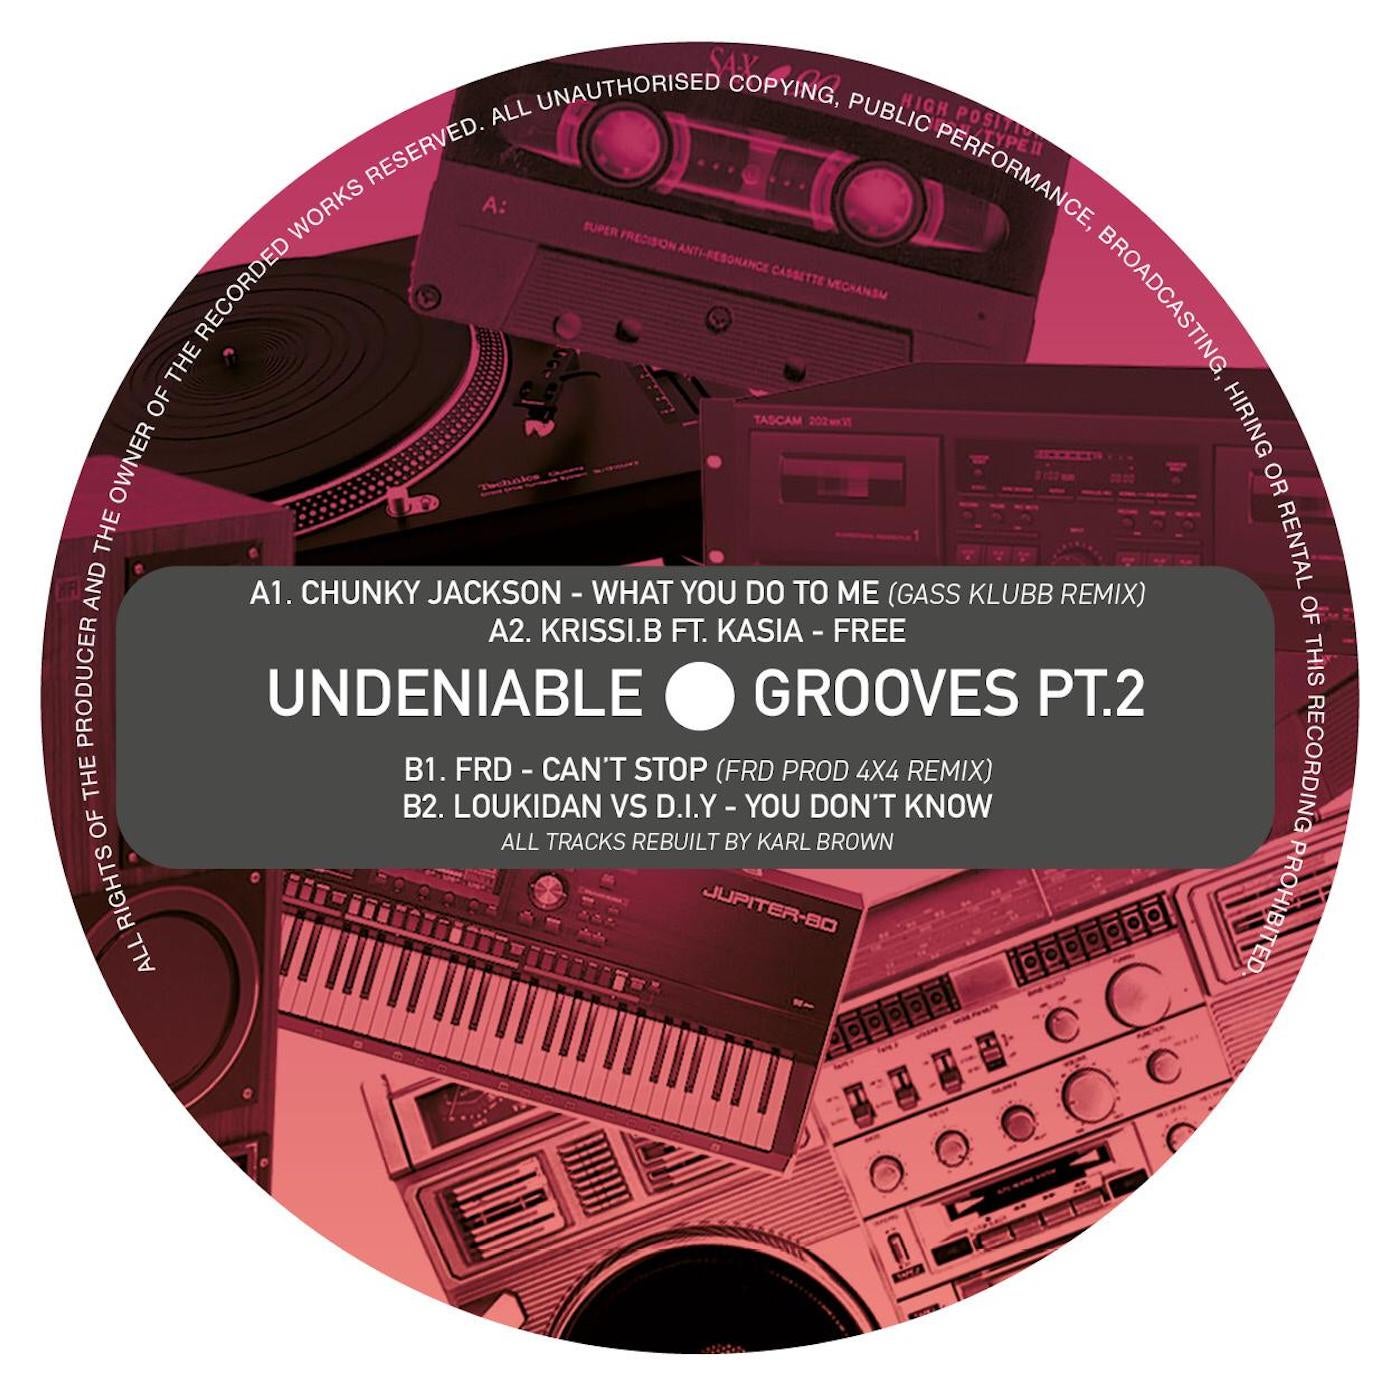 UNDENIABLE GROOVES PT.2